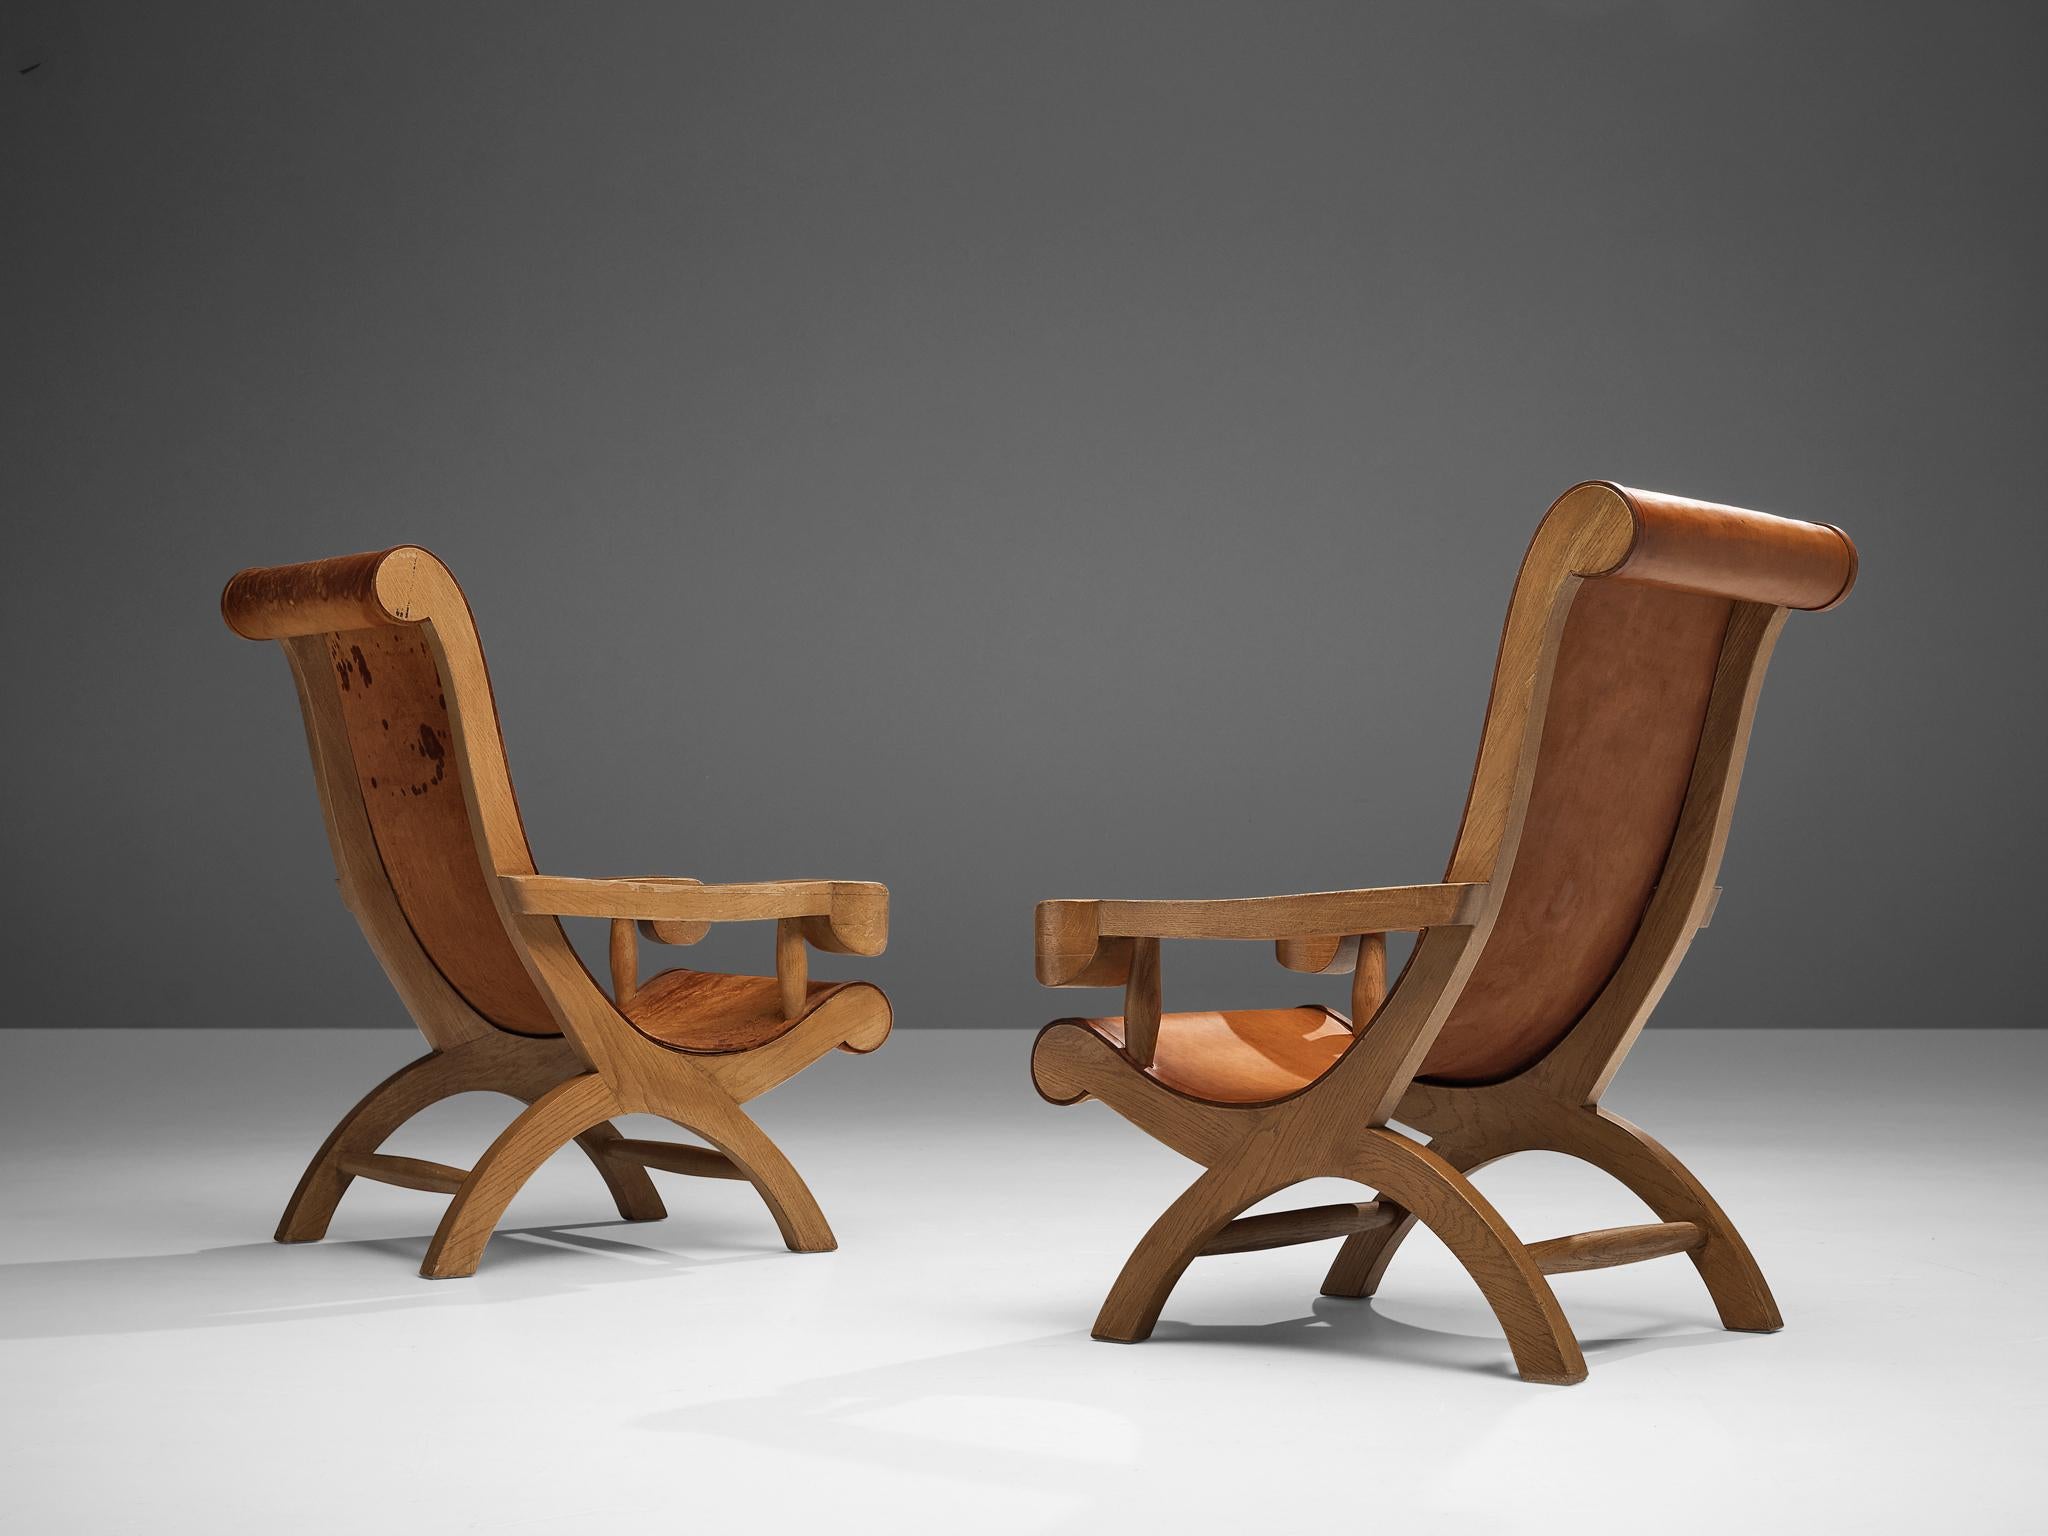 Mexican Clara Porset Lounge Chairs 'Butaque' in Original Patinated Leather